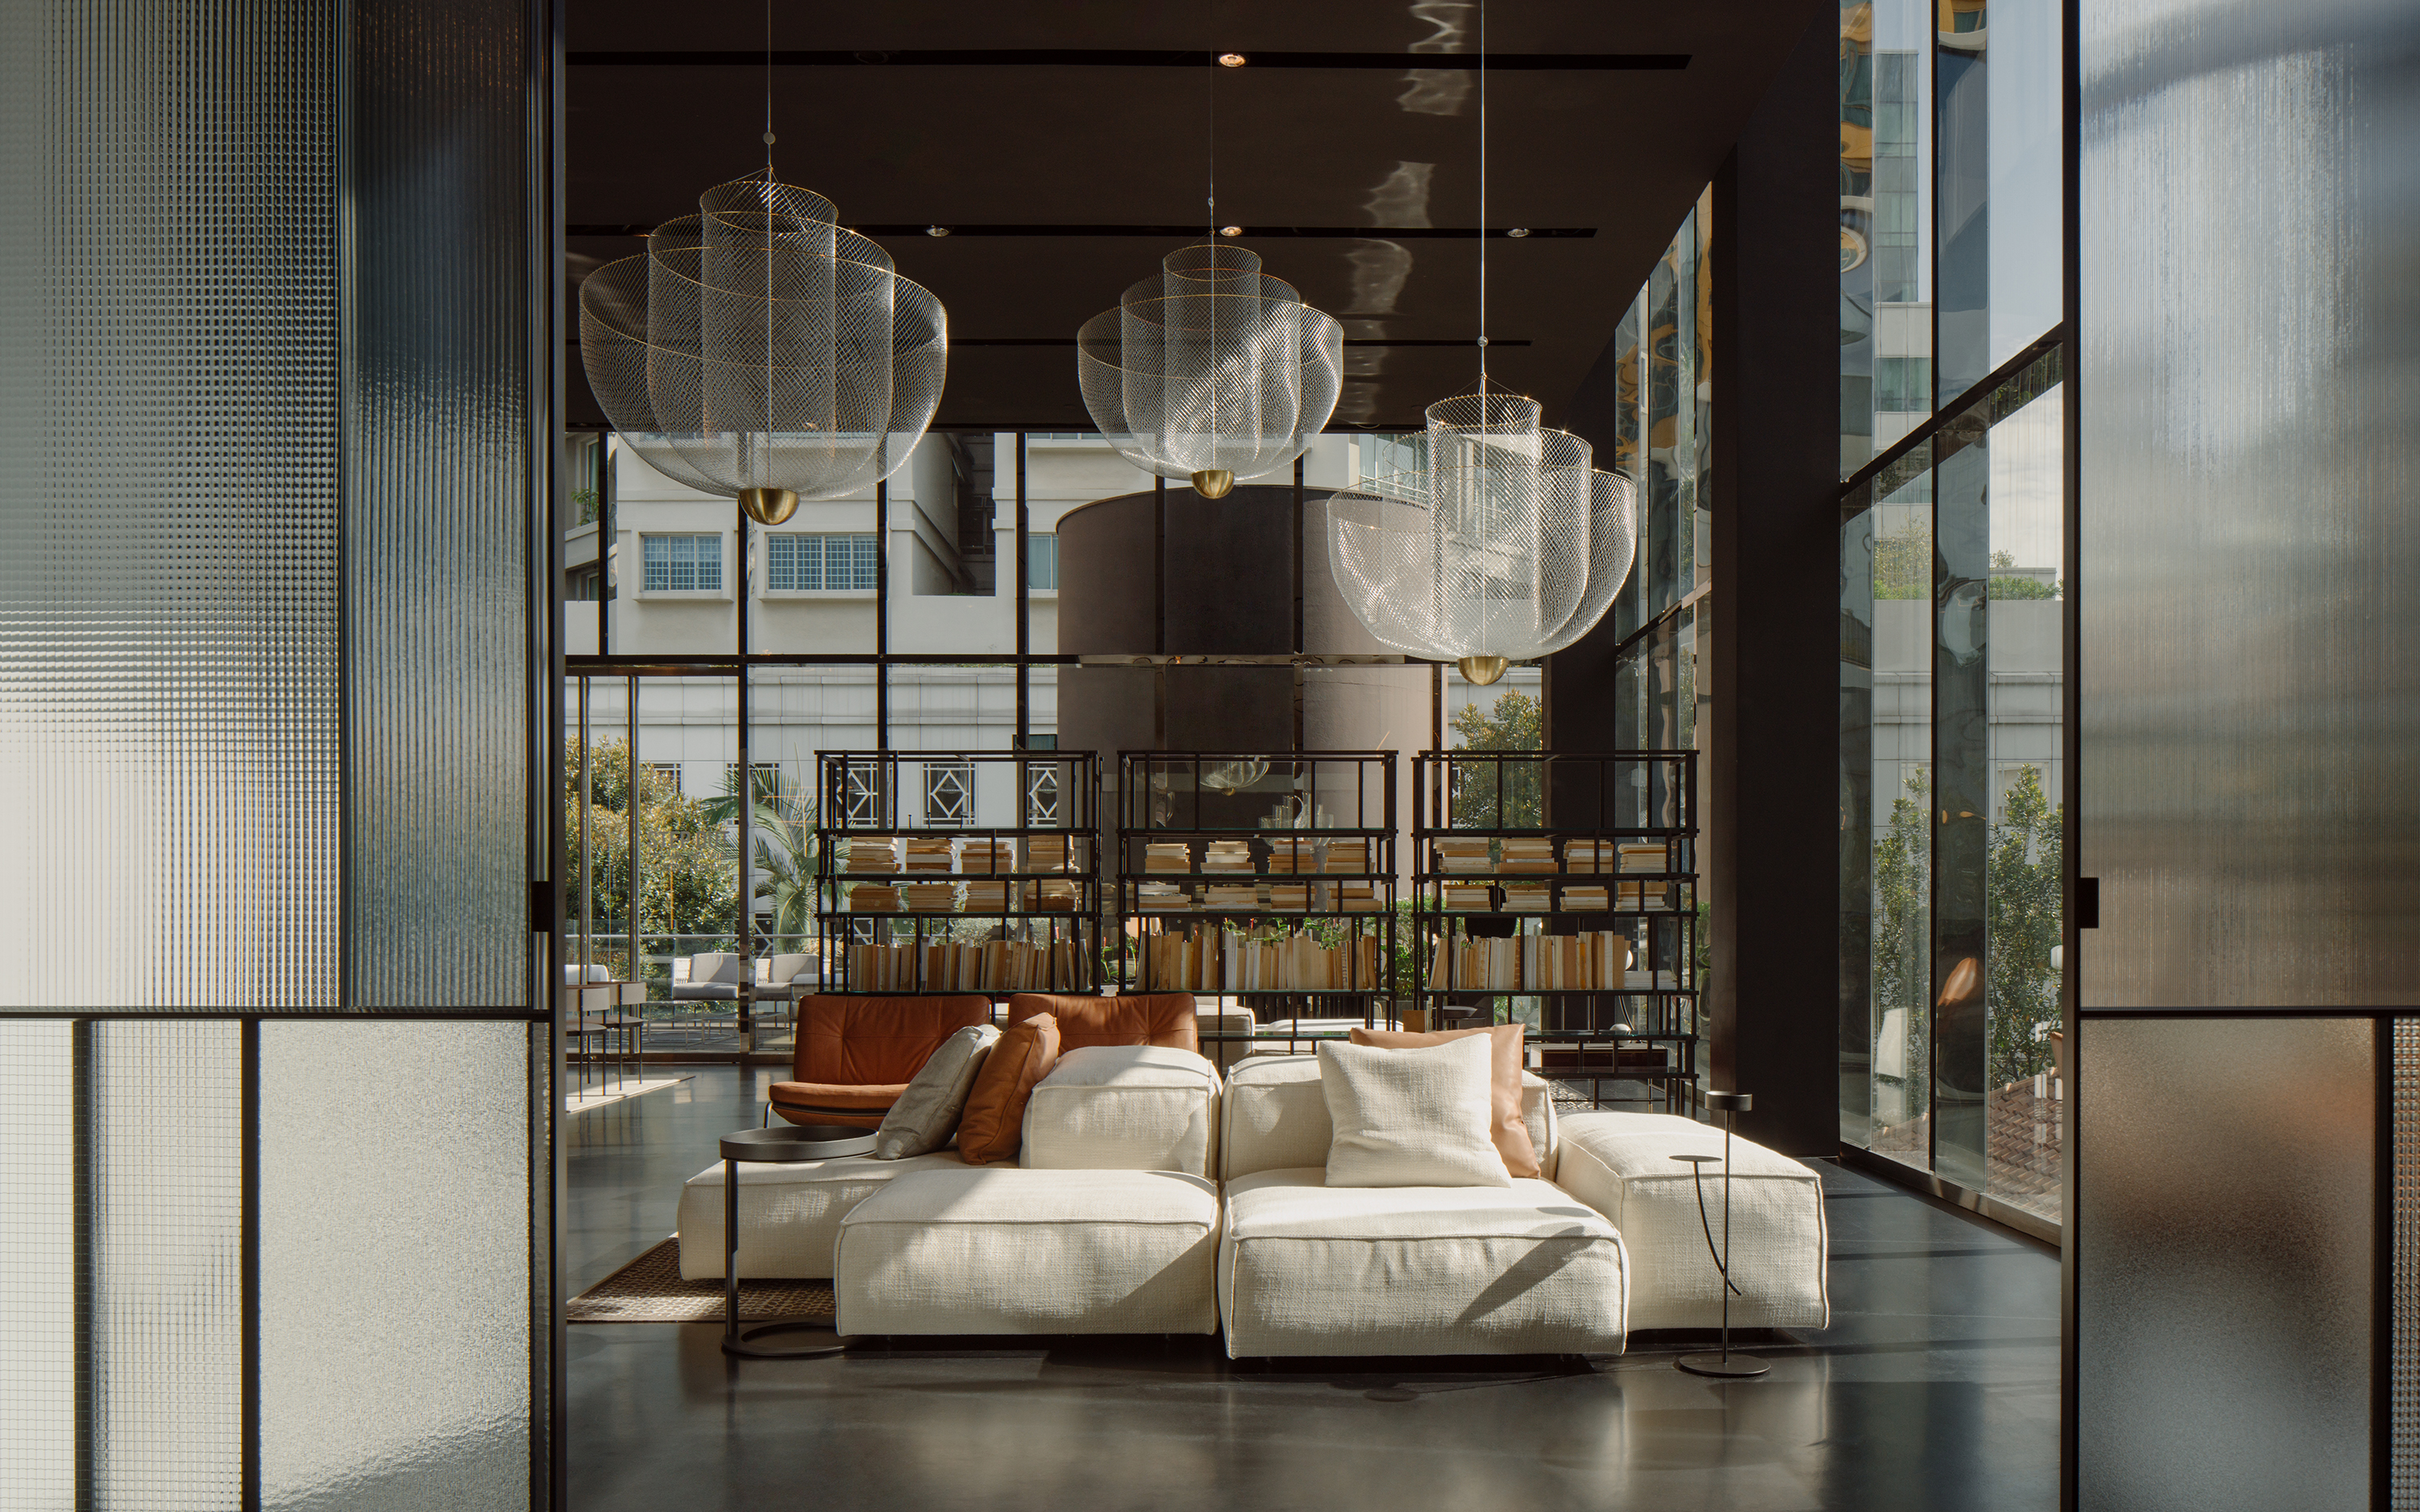 The Sherazade sliding door designed by Piero Lissoni for Glas Italia, the Extrasoft sofa designed by Piero Lissoni and the Off Cut shelving system by Nathan Yong for Living Divani, with the Meshmatics chandelier designed by Rick Tegelaar for Moooi. Image © Khoo Guo Jie, Khoogj.